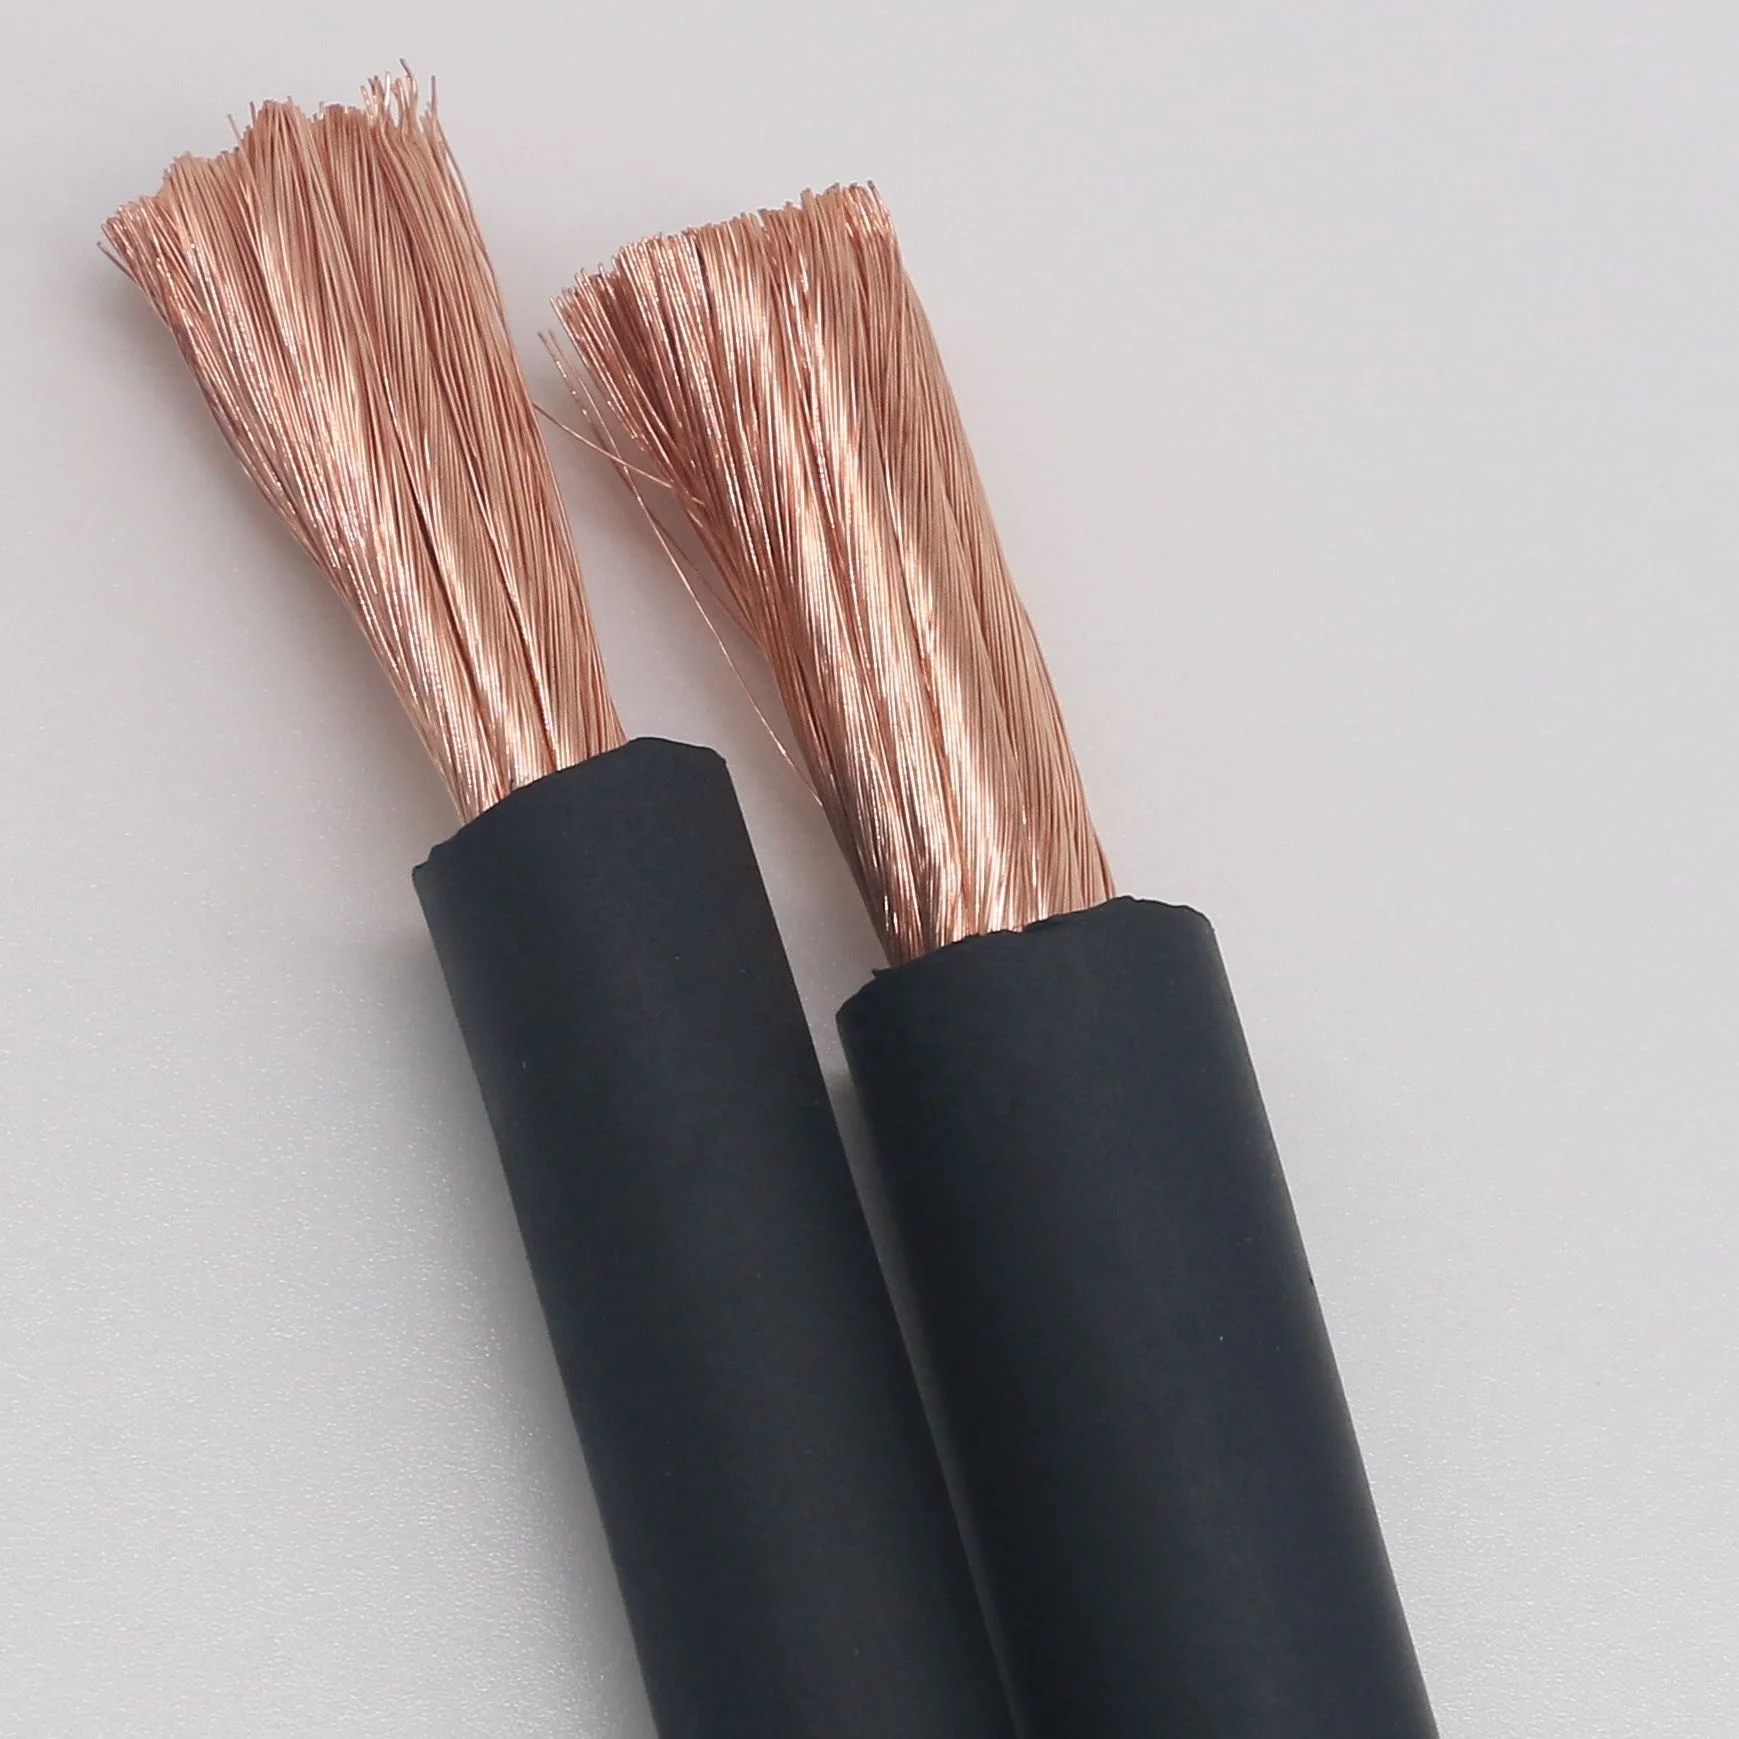 Langley Copper Welding or Earth Cable 25mm 200 Amps Price Per Metre